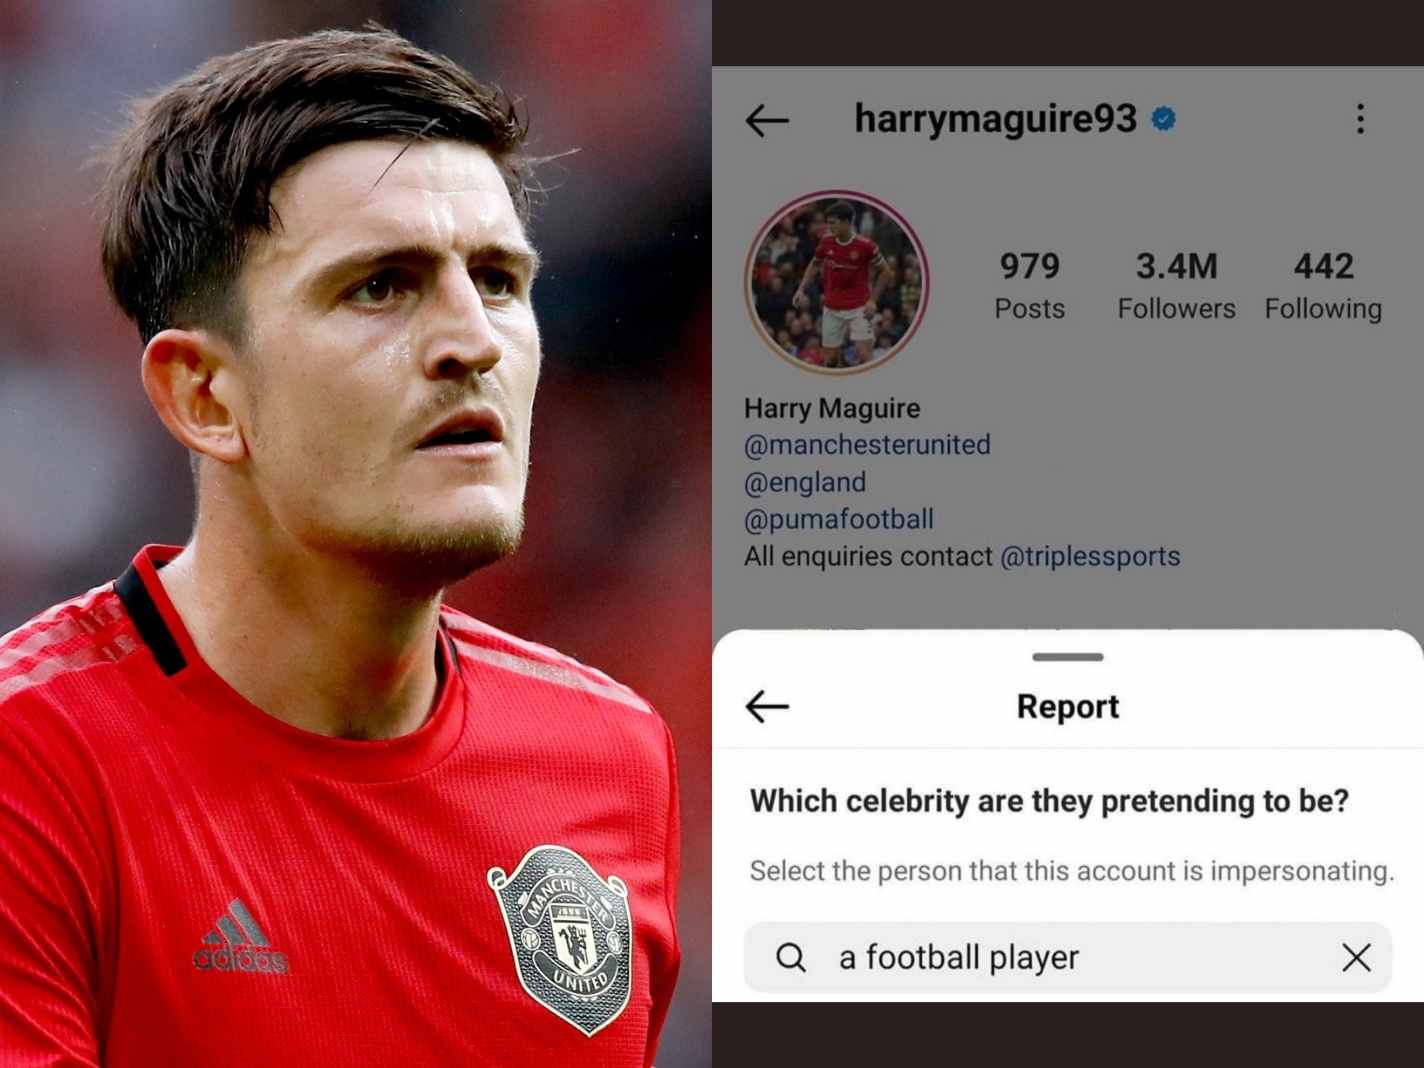 Fans report Harry Maguire for pretending to be a football player